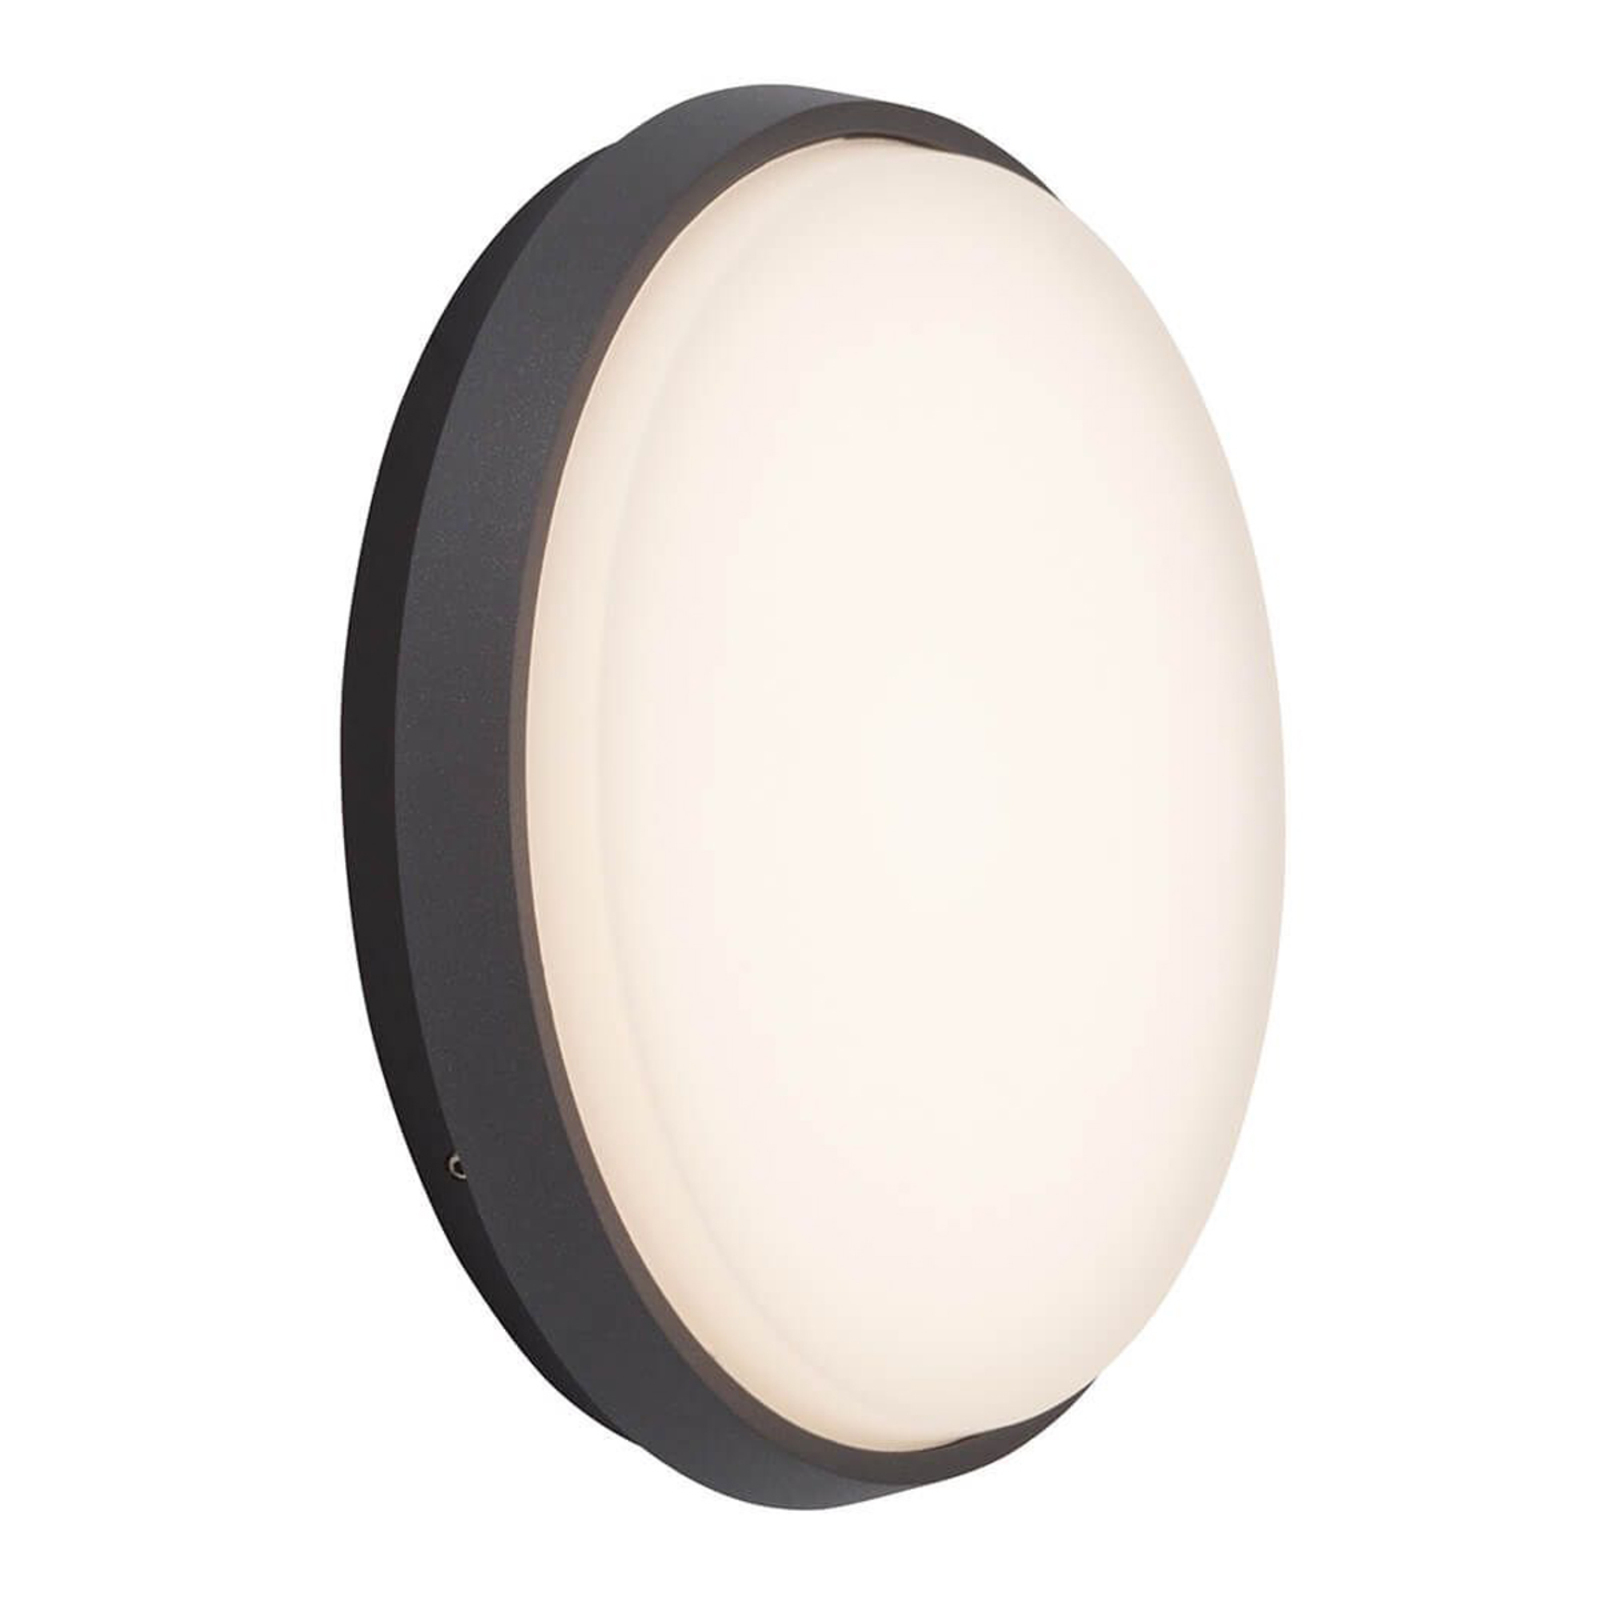 Efficient Letan Round LED outdoor wall lamp